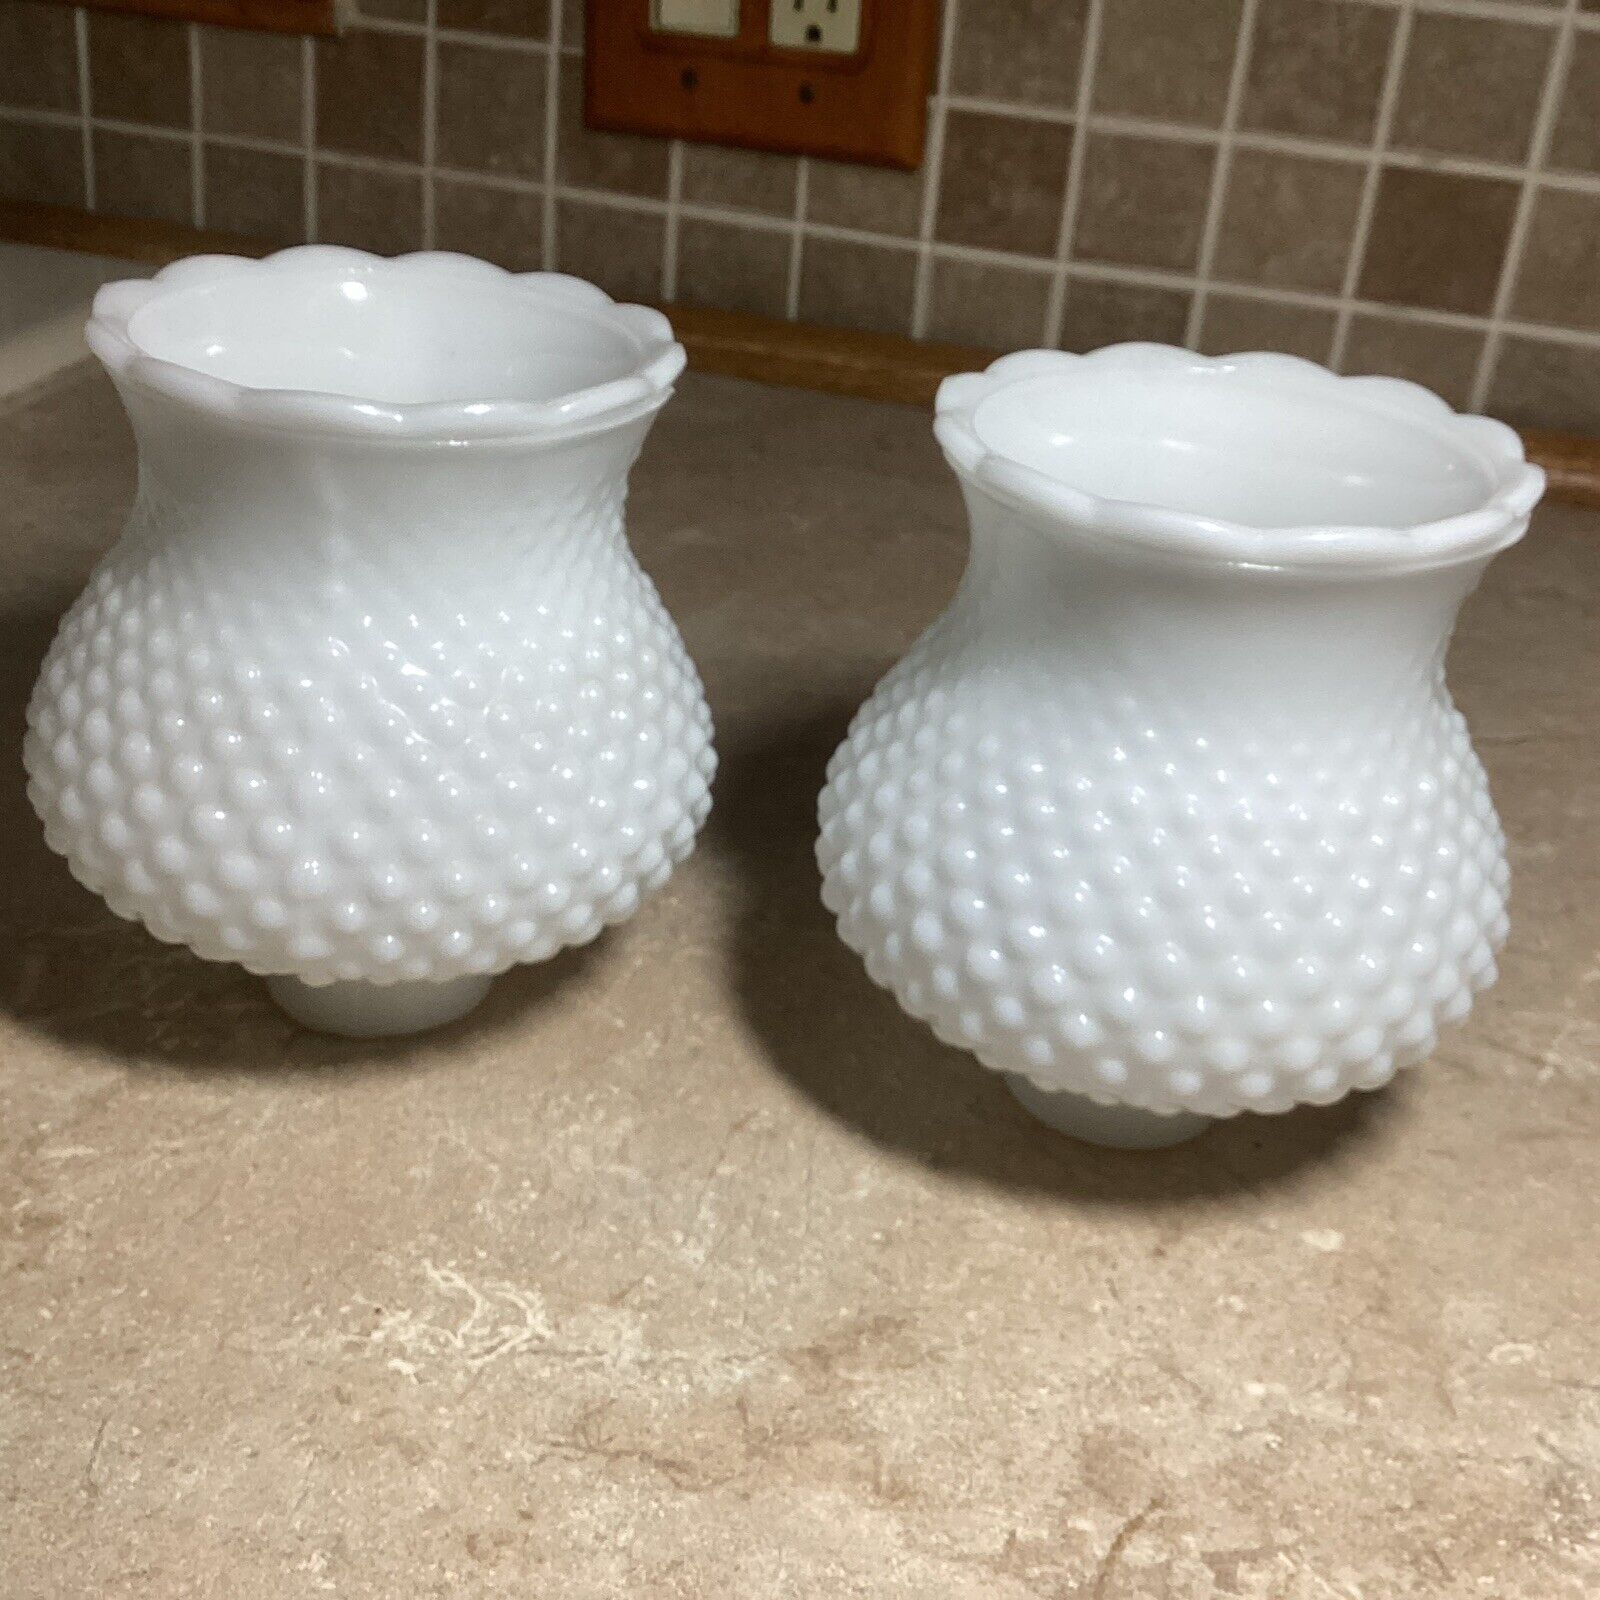 2 Vintage Hobnail White Milk Glass Shades 5-1/4” Tall X 1-1/2” Fitter Ruffle Top